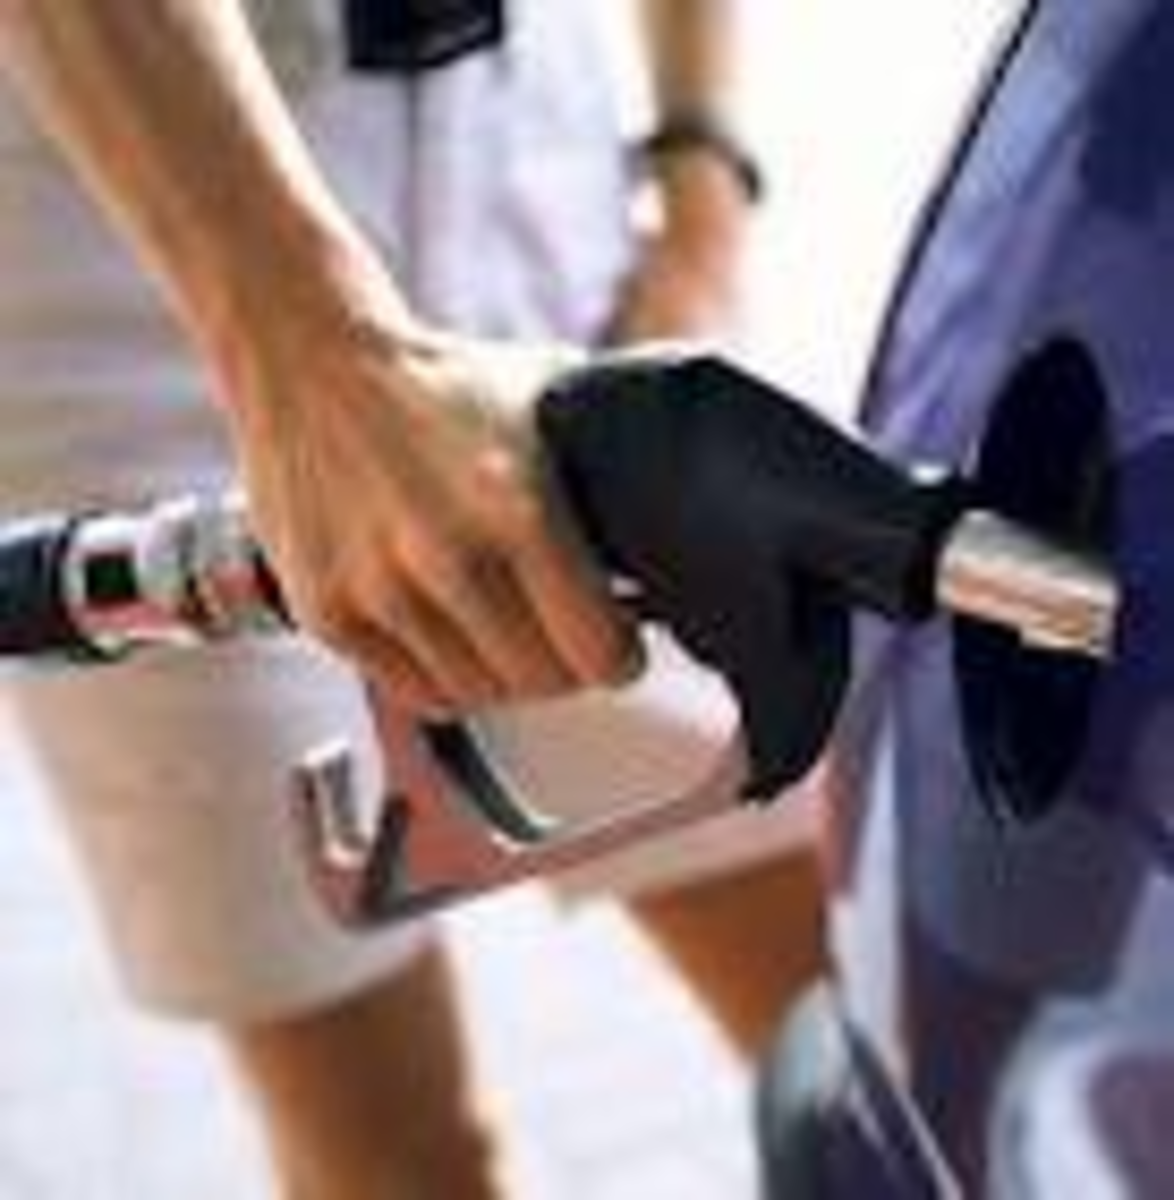 Do you pay for gas with a credit card?